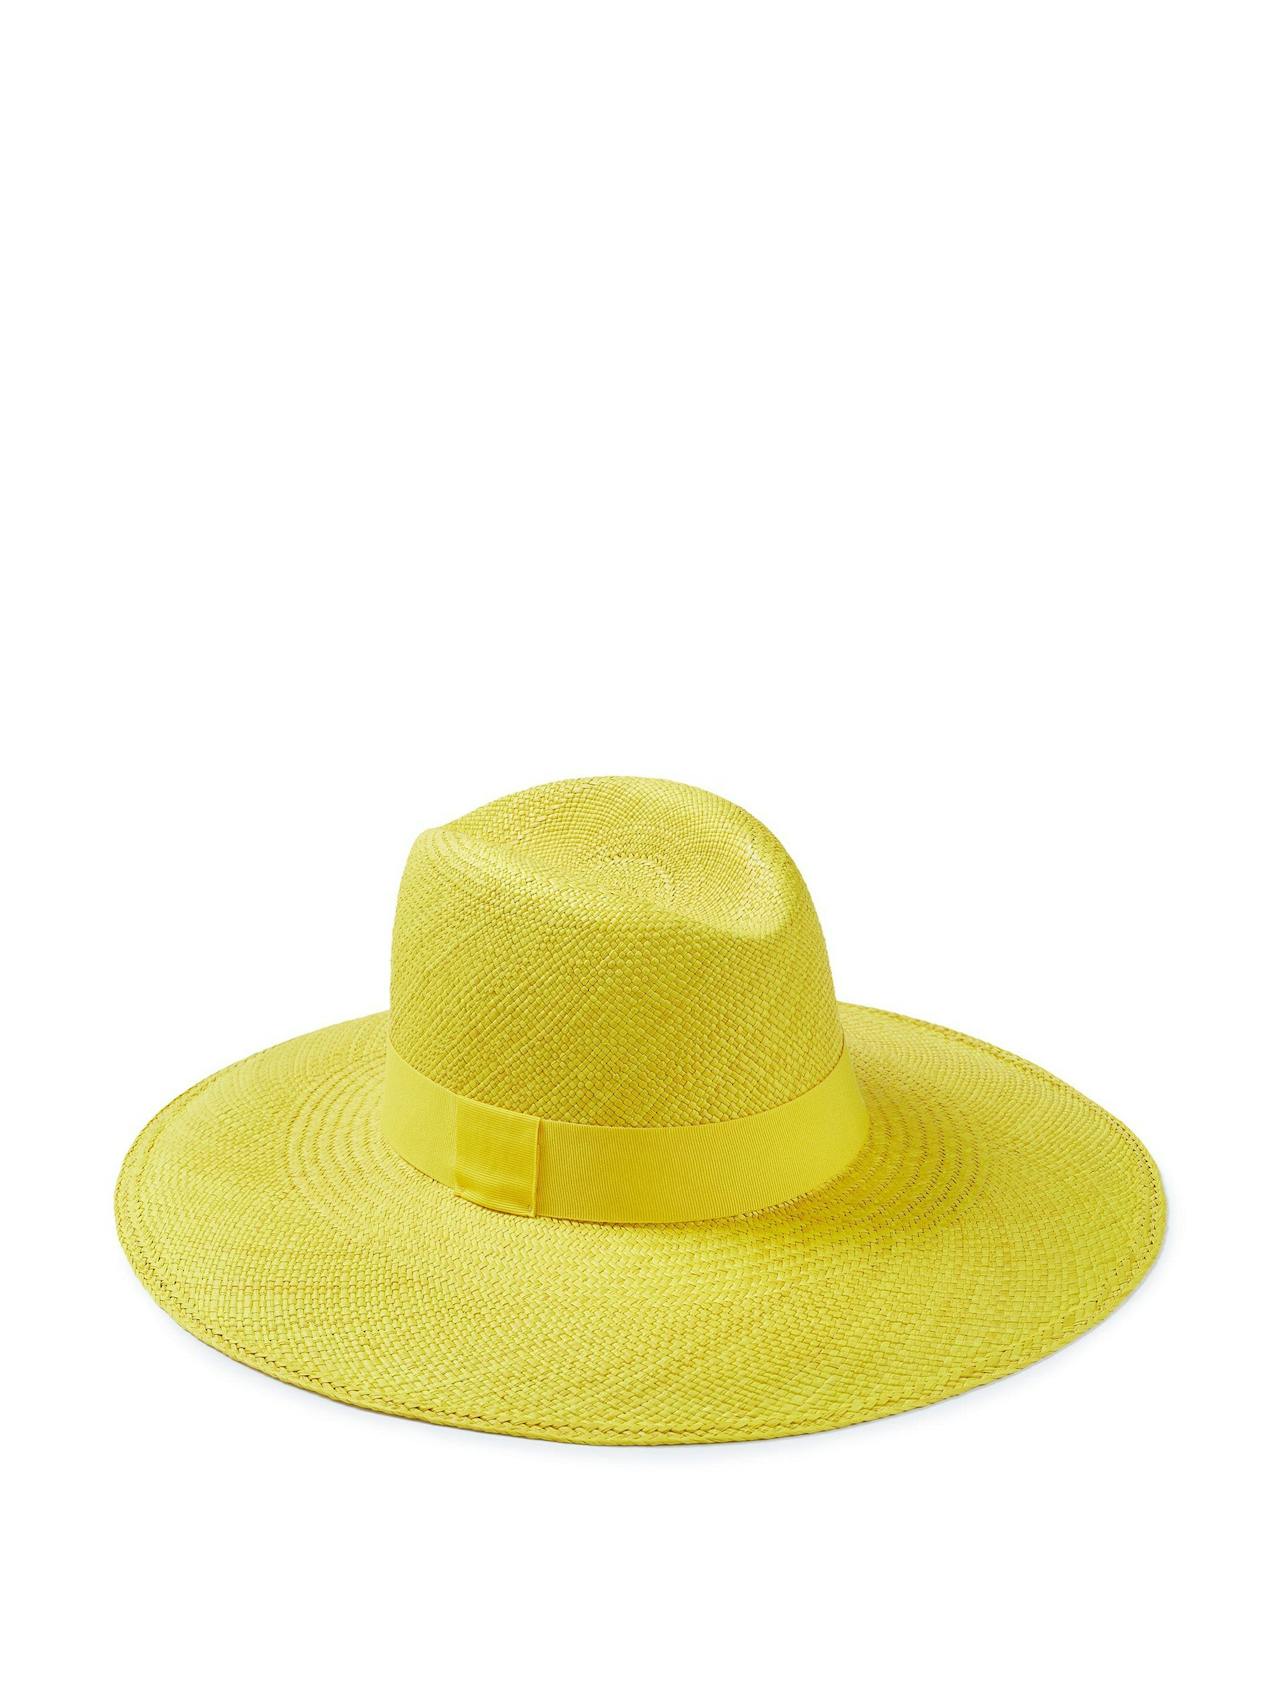 Livia hat in yellow